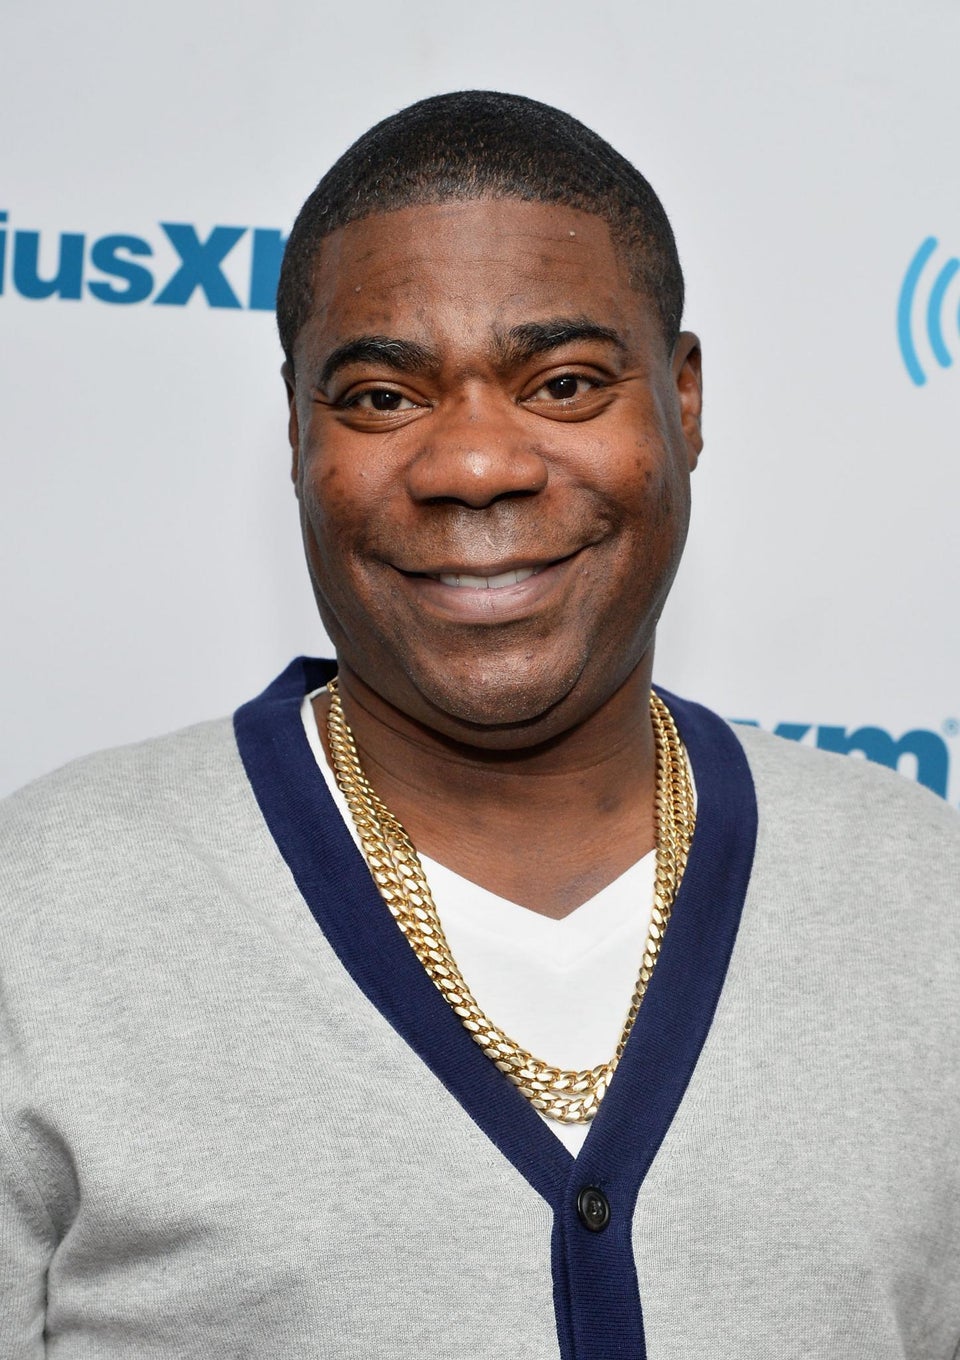 Tracy Morgan Opens Up About Suicidal Thoughts Following His Tragic Accident